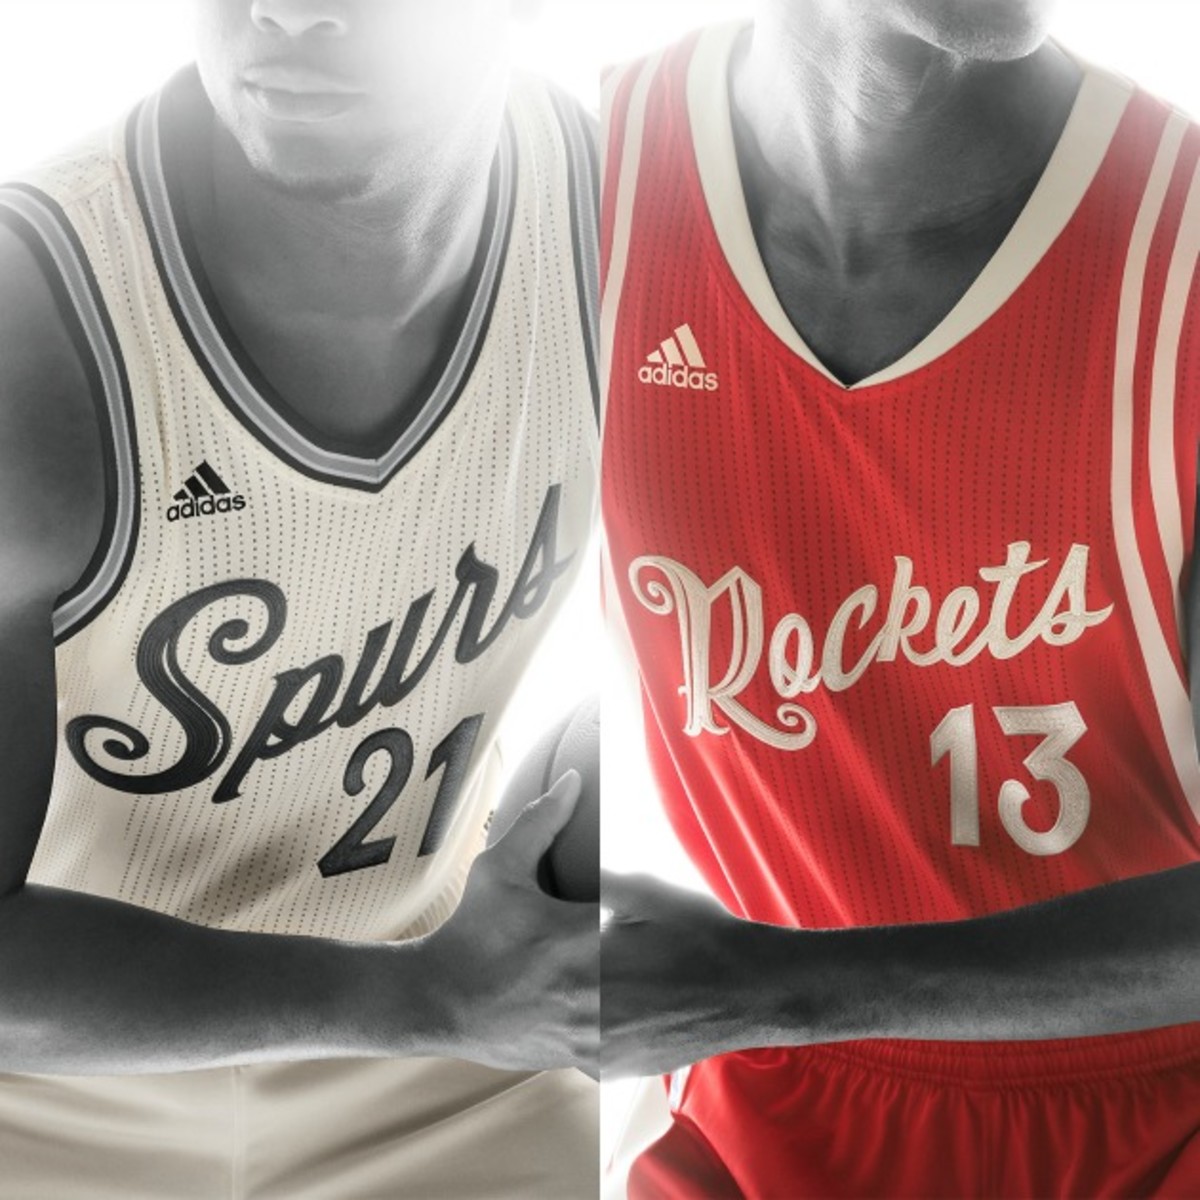 Photos: NBA Christmas jerseys, socks unveiled for 2015 - Sports Illustrated